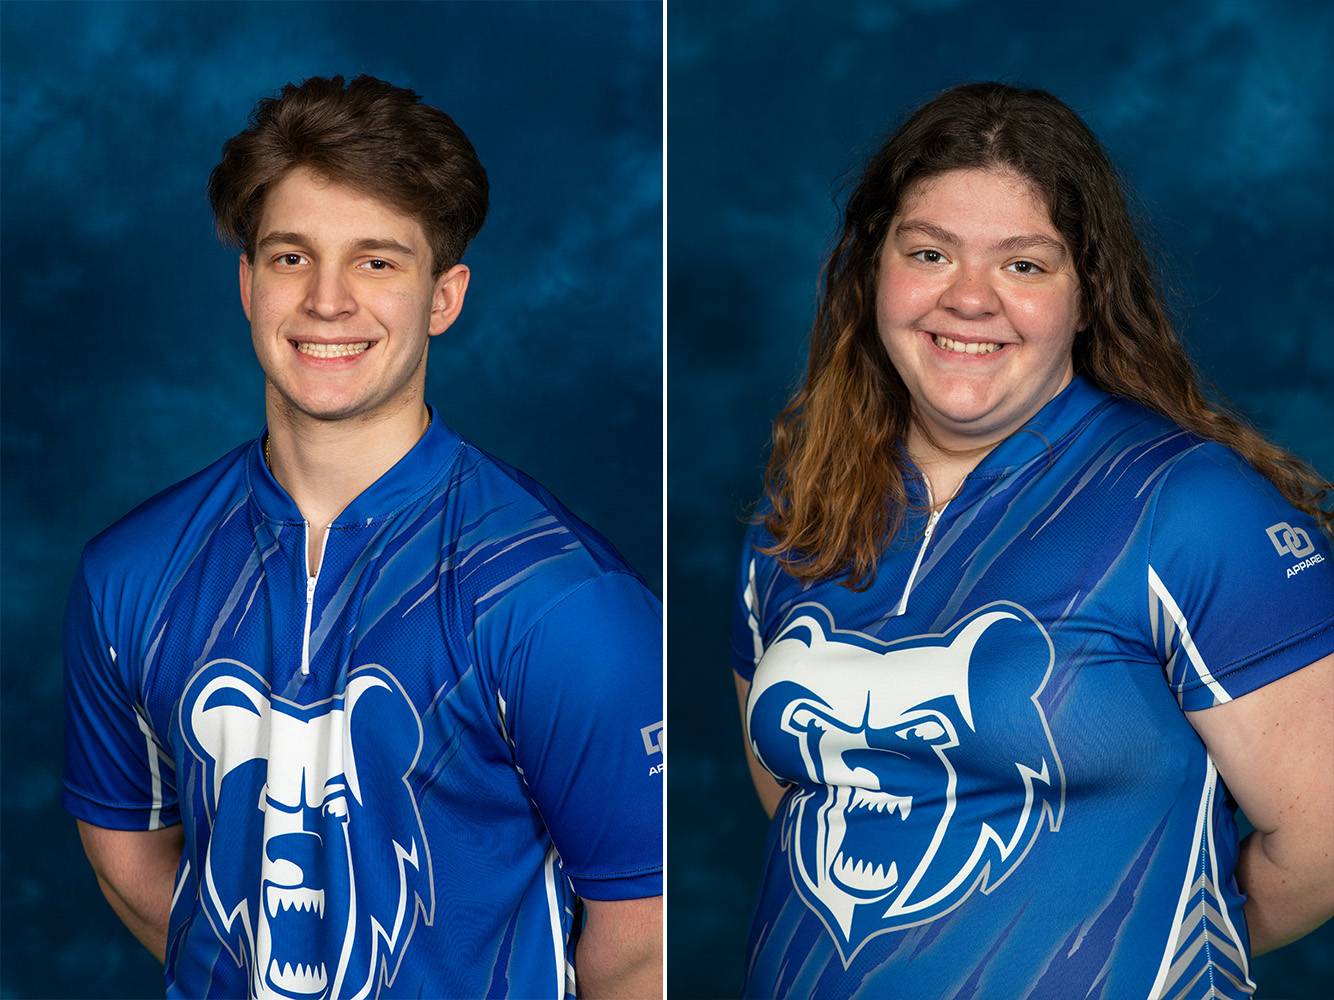 KCC bowlers Bryan Foote and Emma O'Donnell.